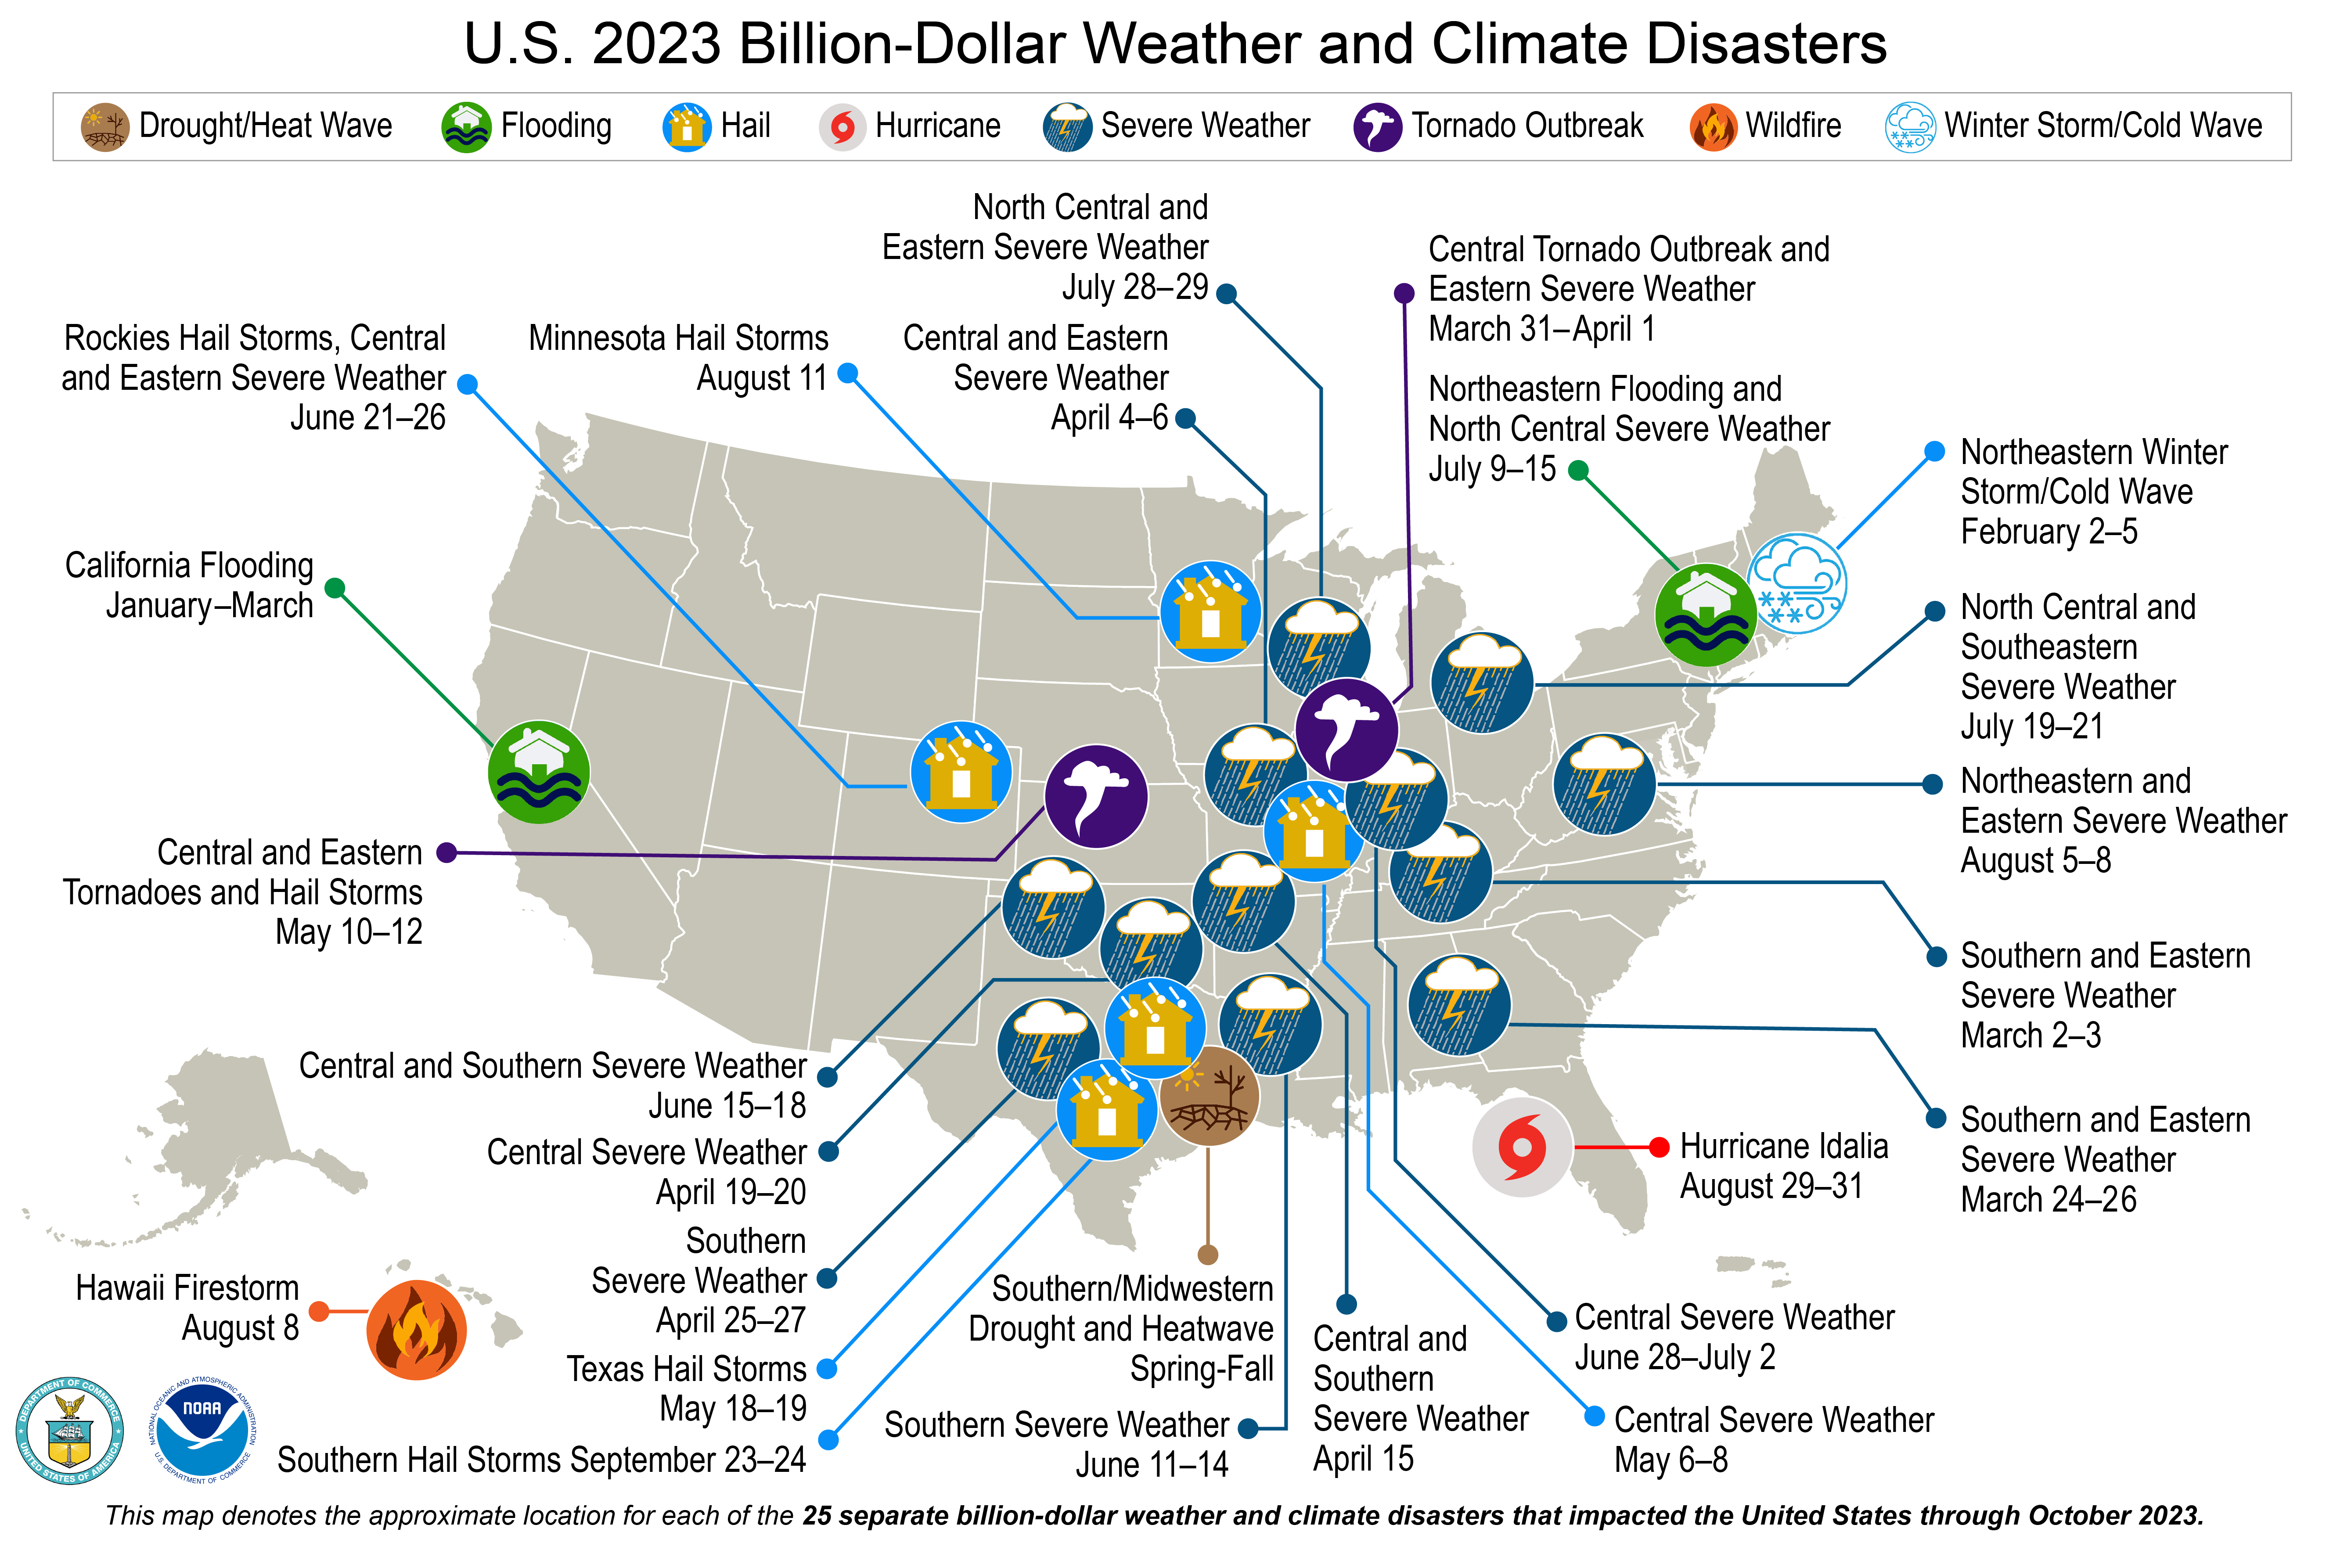 A map of the U.S. plotted with 25 weather and climate disasters each costing $1 billion or more that occurred between January and October, 2023.